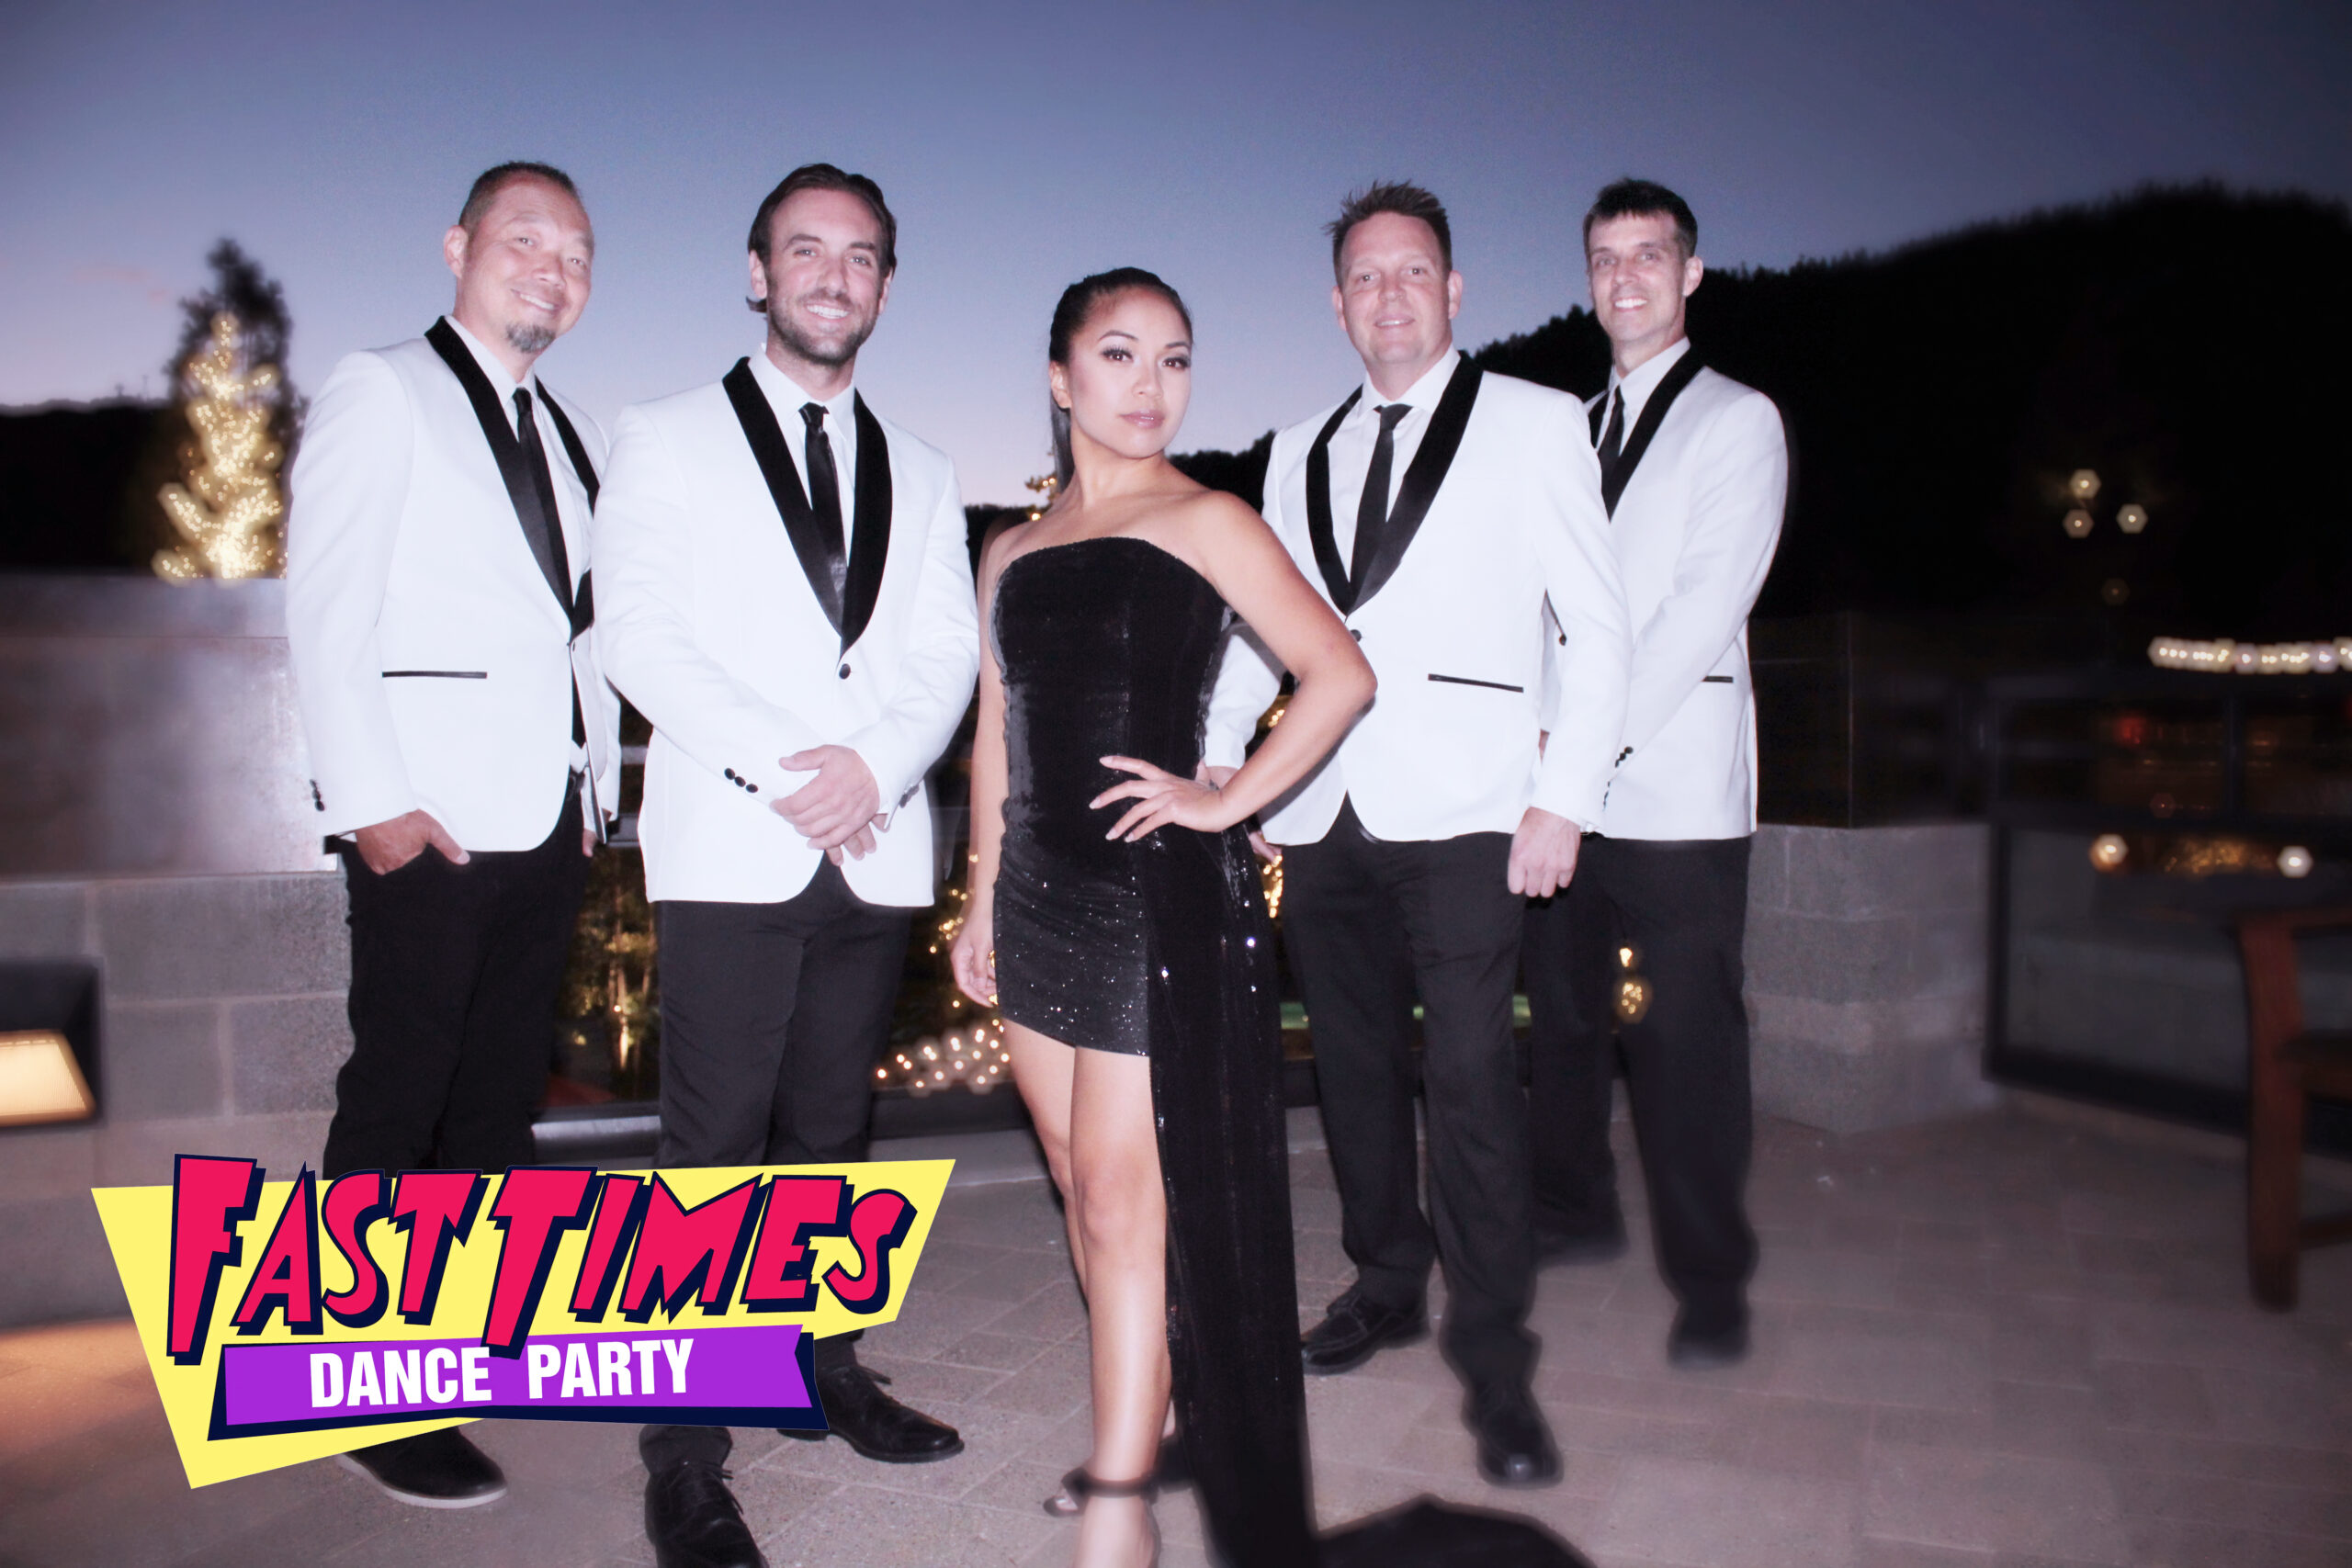 Fast Times dance party wedding, events, and party cover band